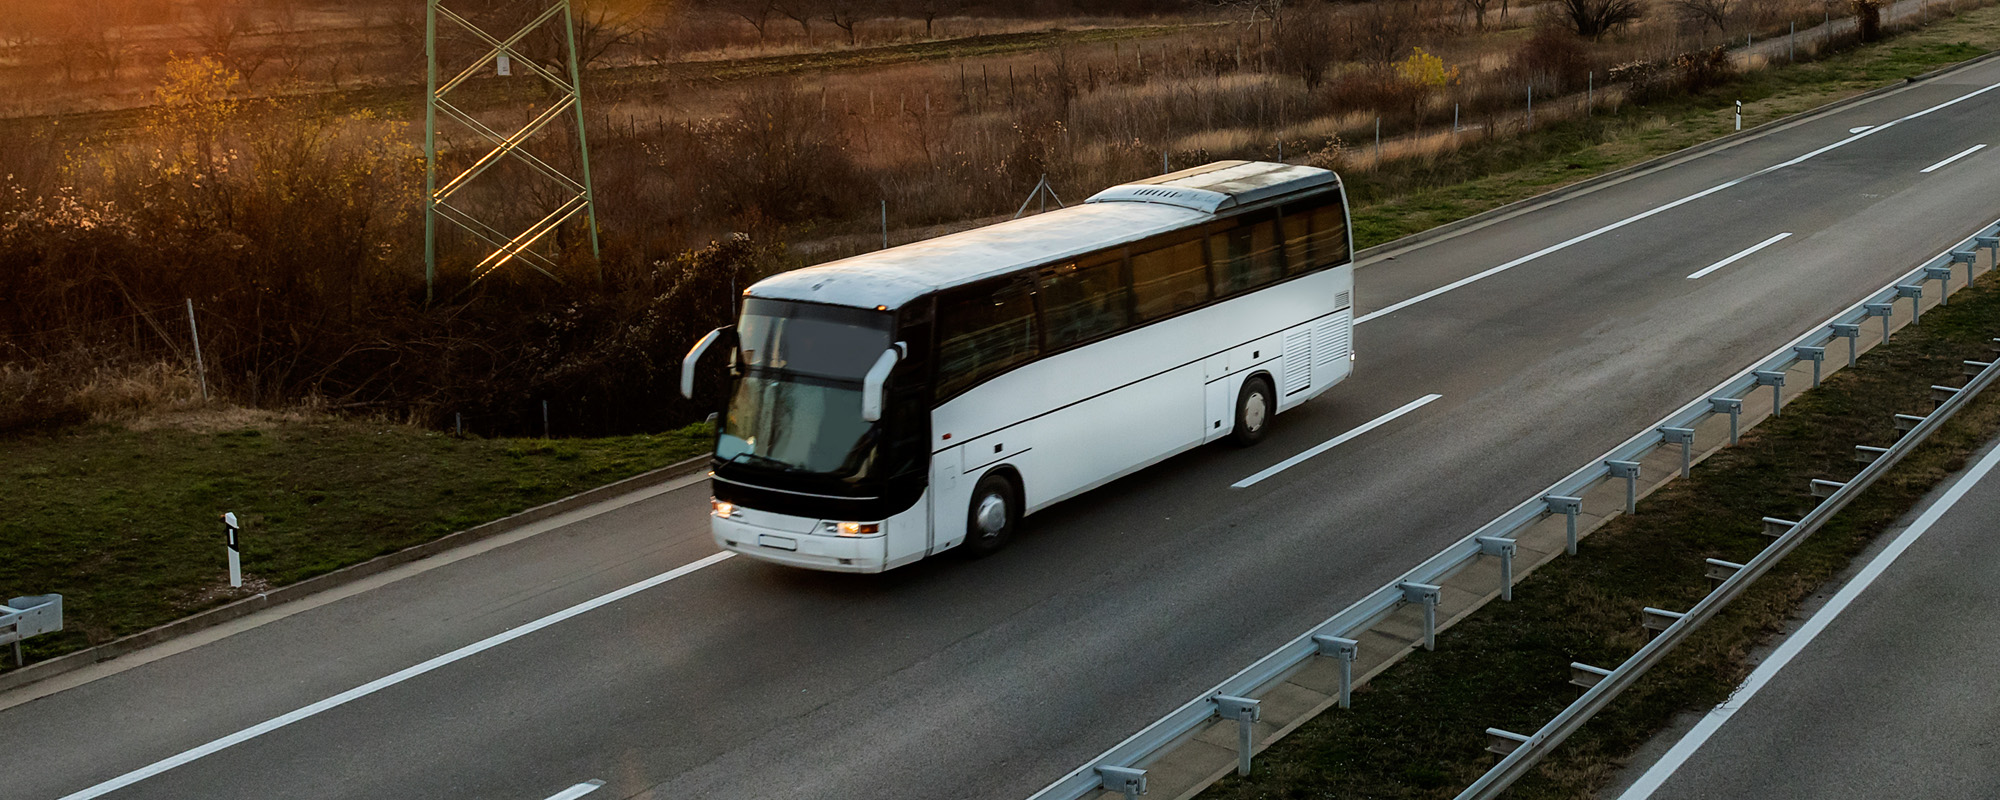 White bus traveling on a country highway